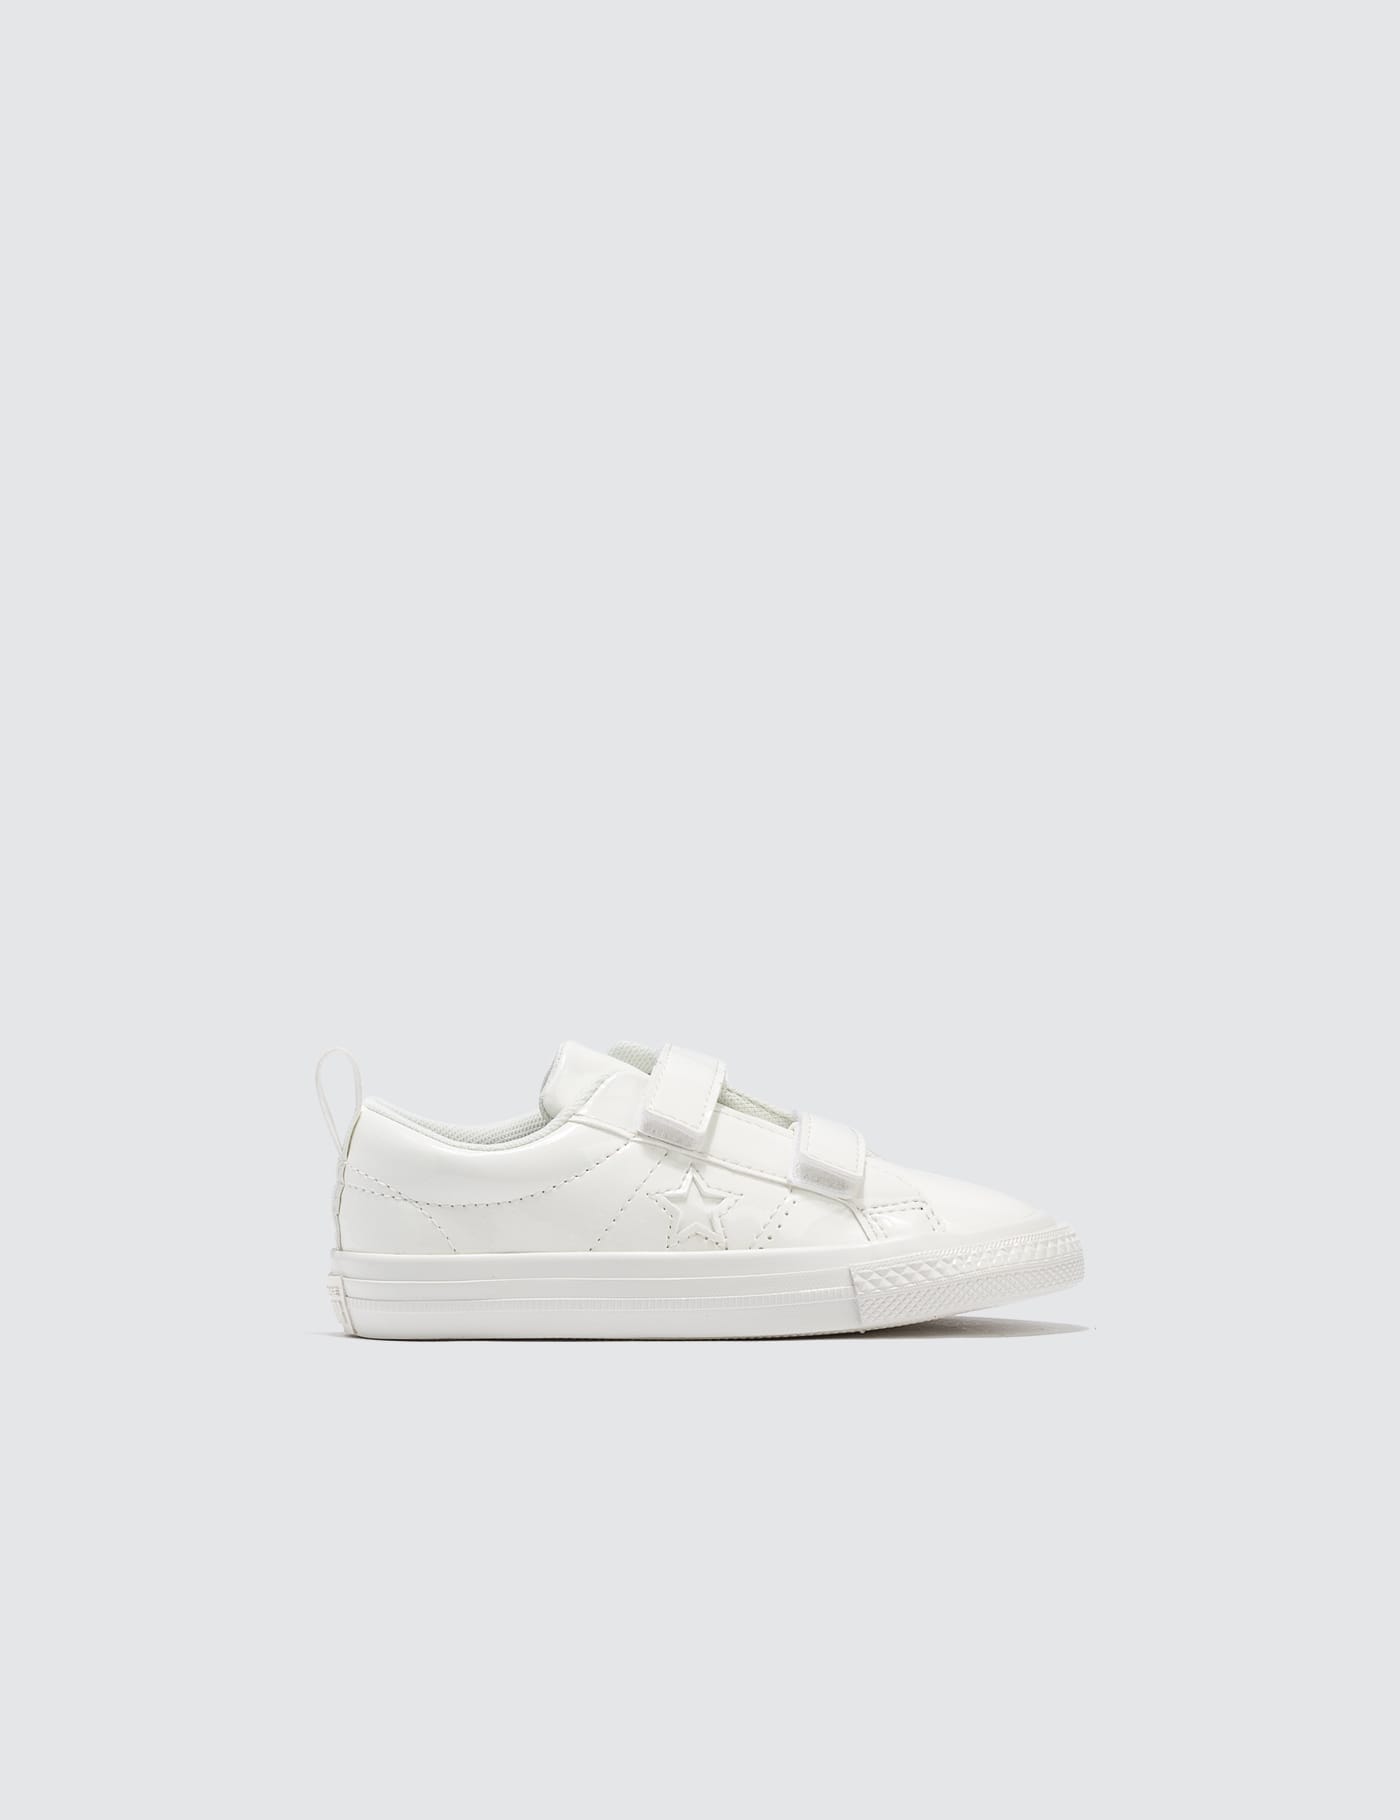 converse one star 2v infant